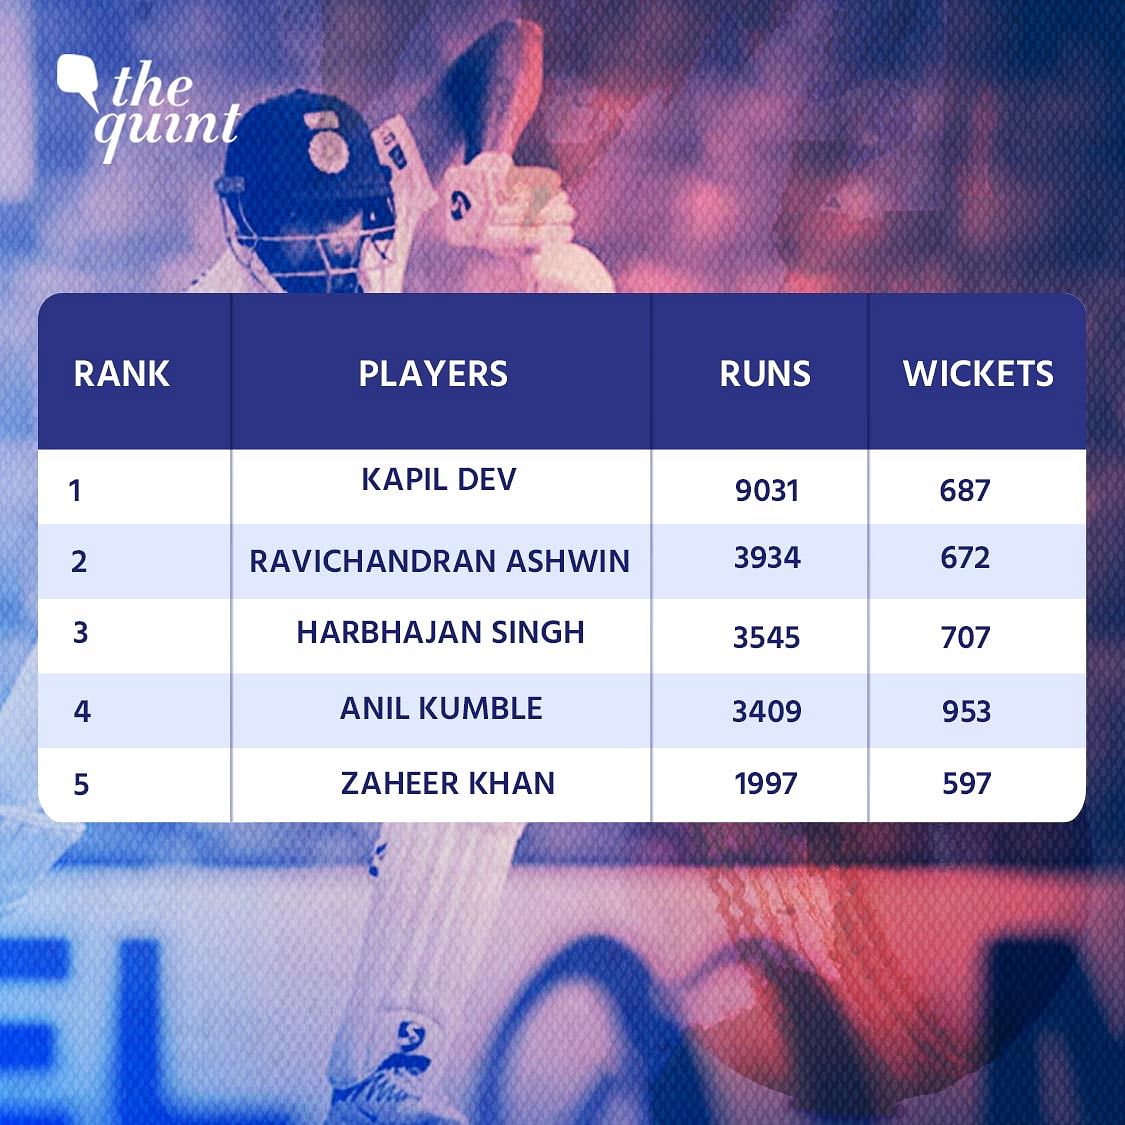 Numbers validate the greatness of Ravichandran Ashwin, despite not being widely celebrated otherwise.